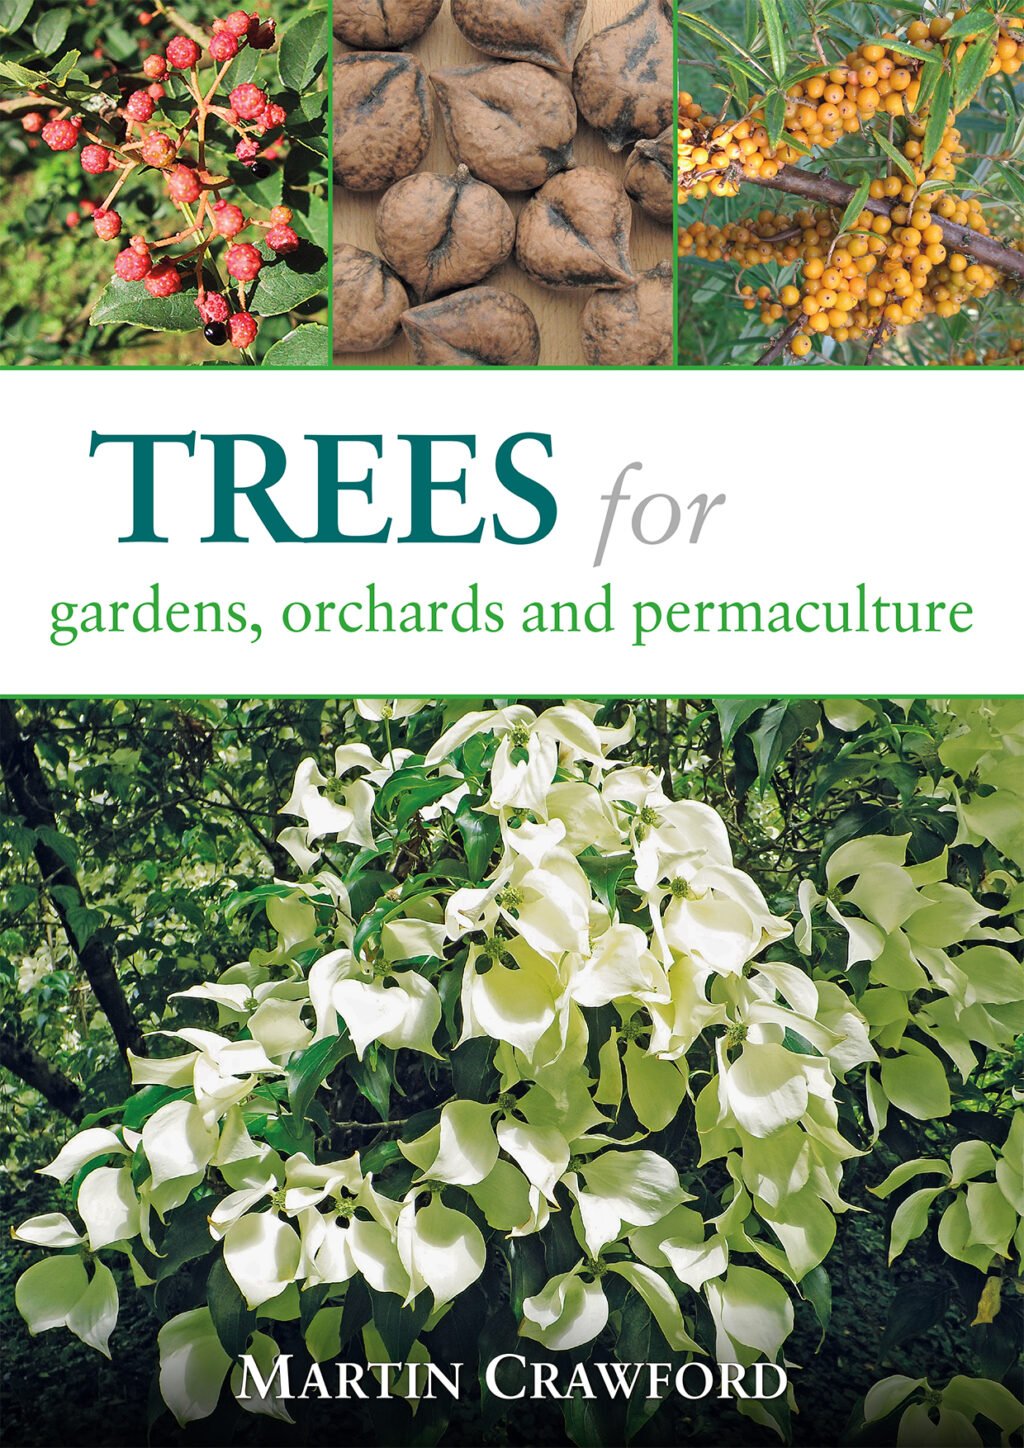 The Trees for Gardens